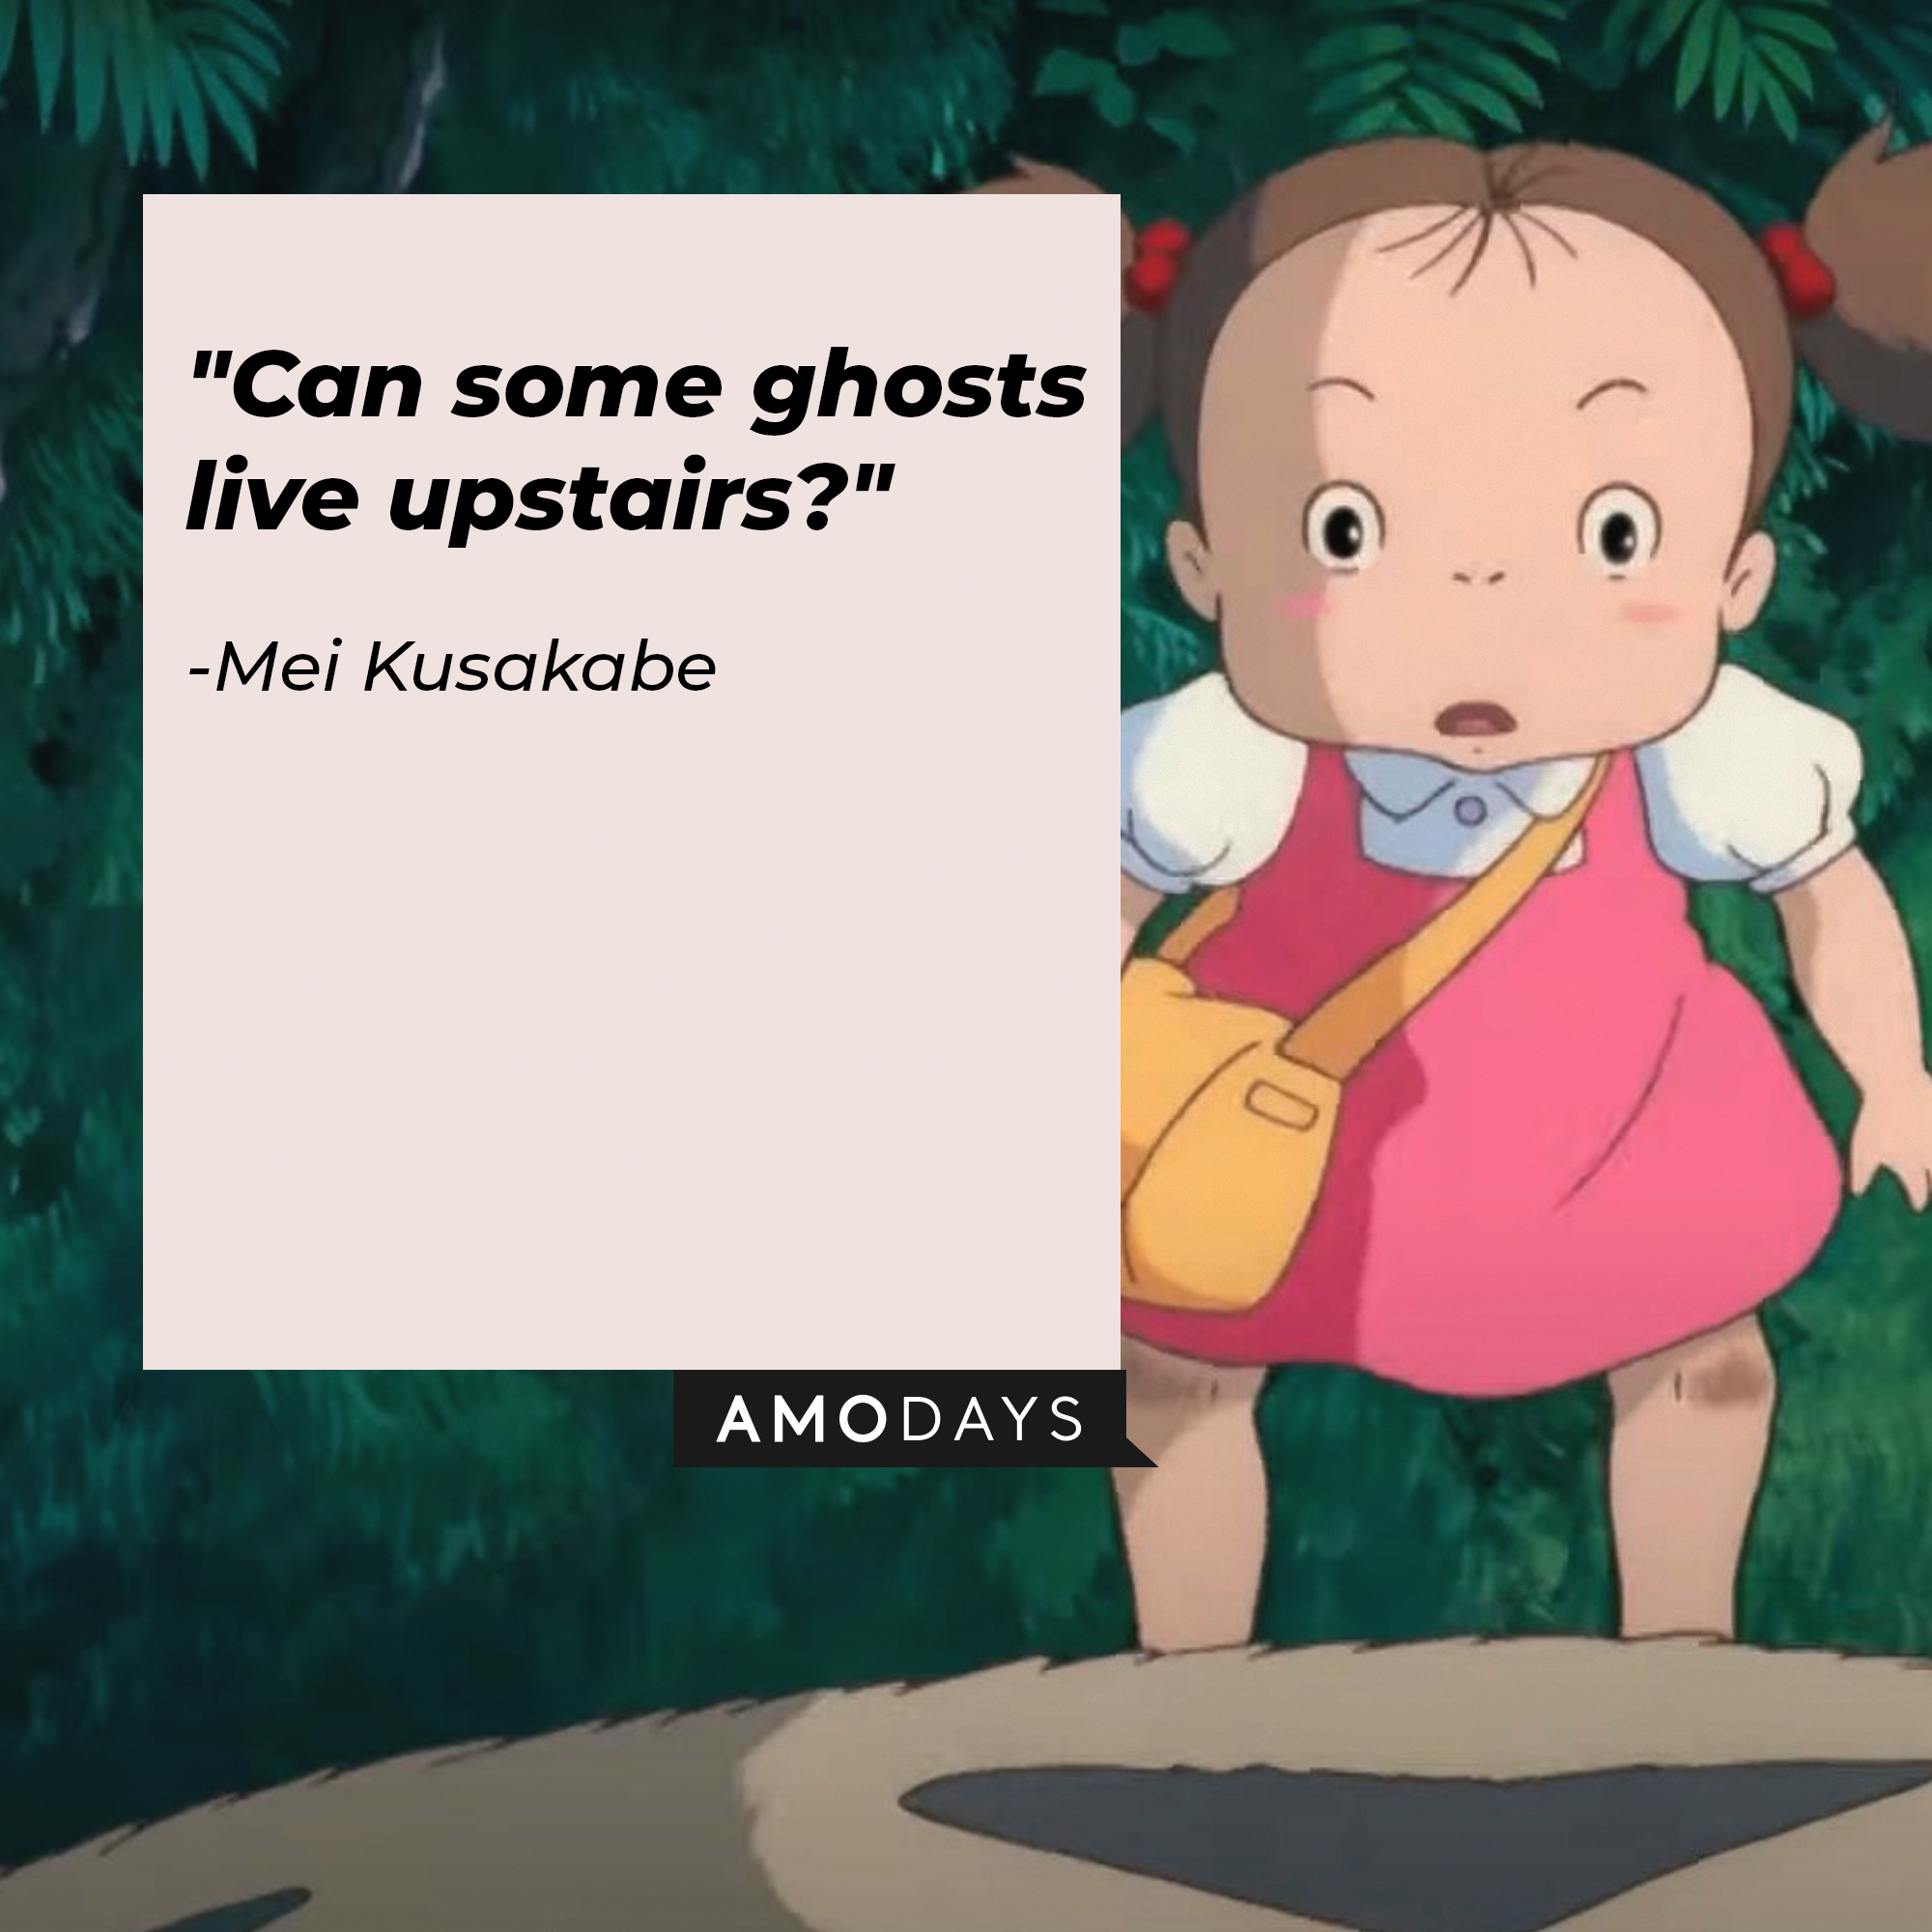 Mei Kusakabe's quote: "Can some ghosts live upstairs?" | Source: Facebook.com/GhibliUSA